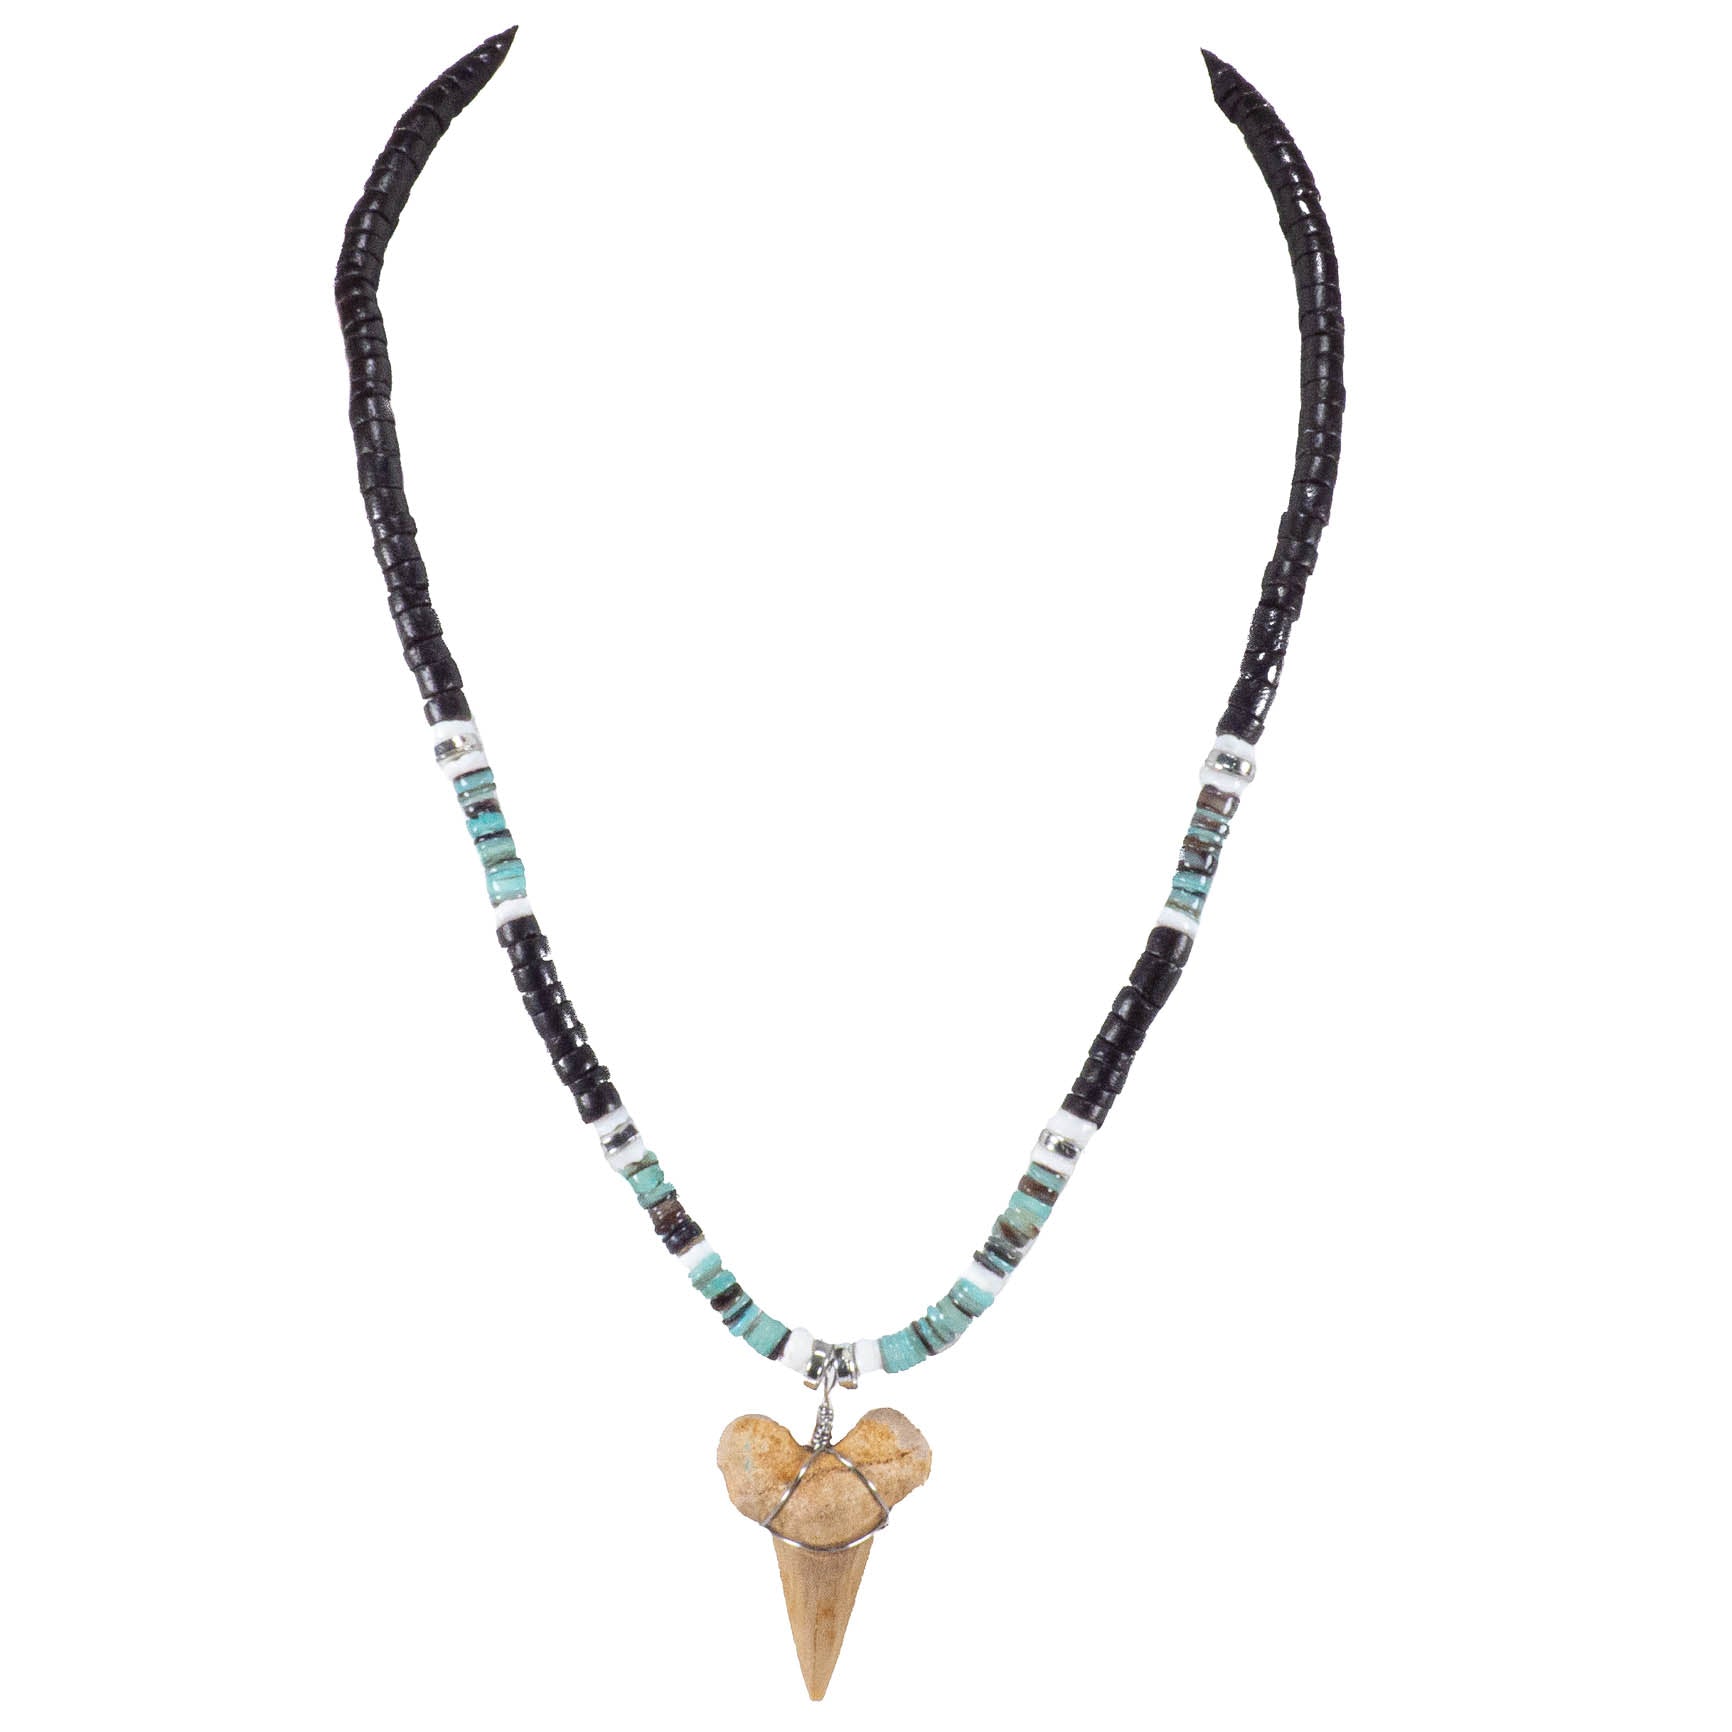 1¼"+ Shark Tooth Pendant on Black Coconut & Green Shell Beads Necklace